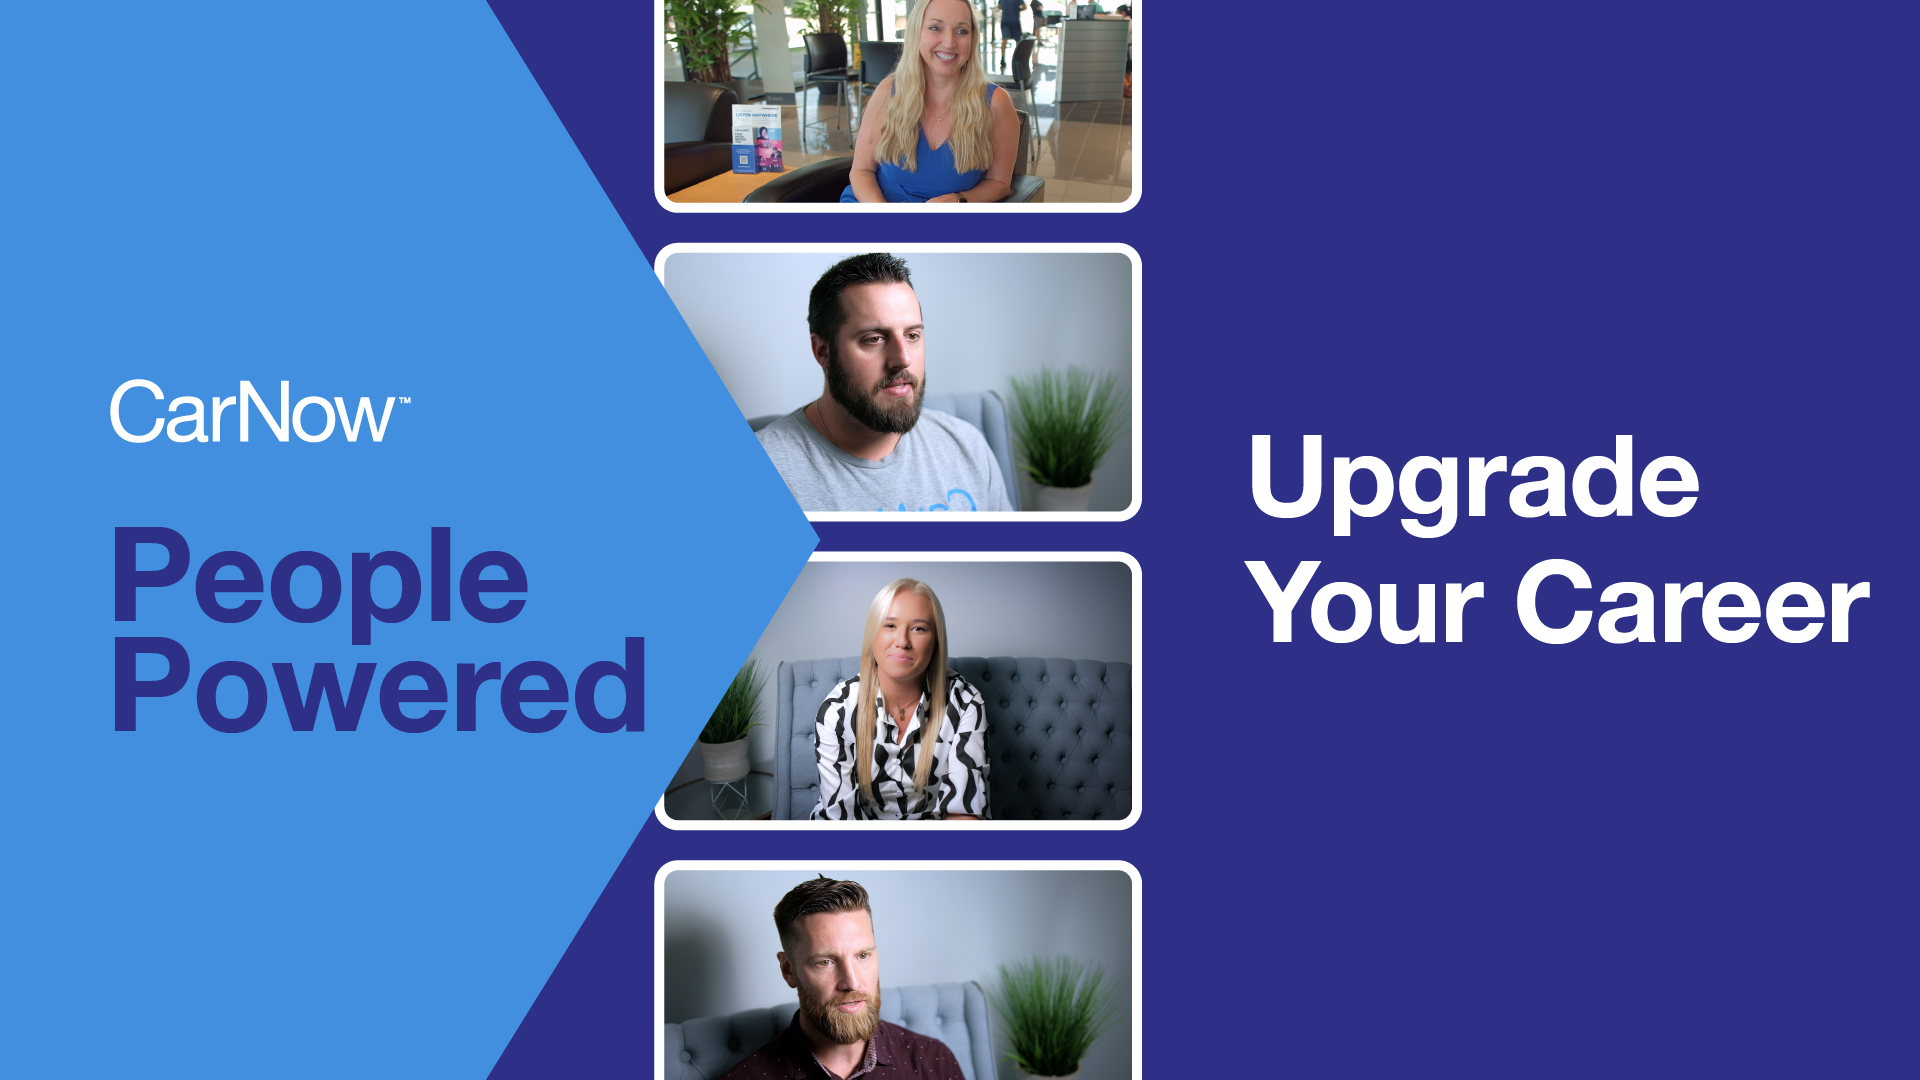 Upgrade Your Career